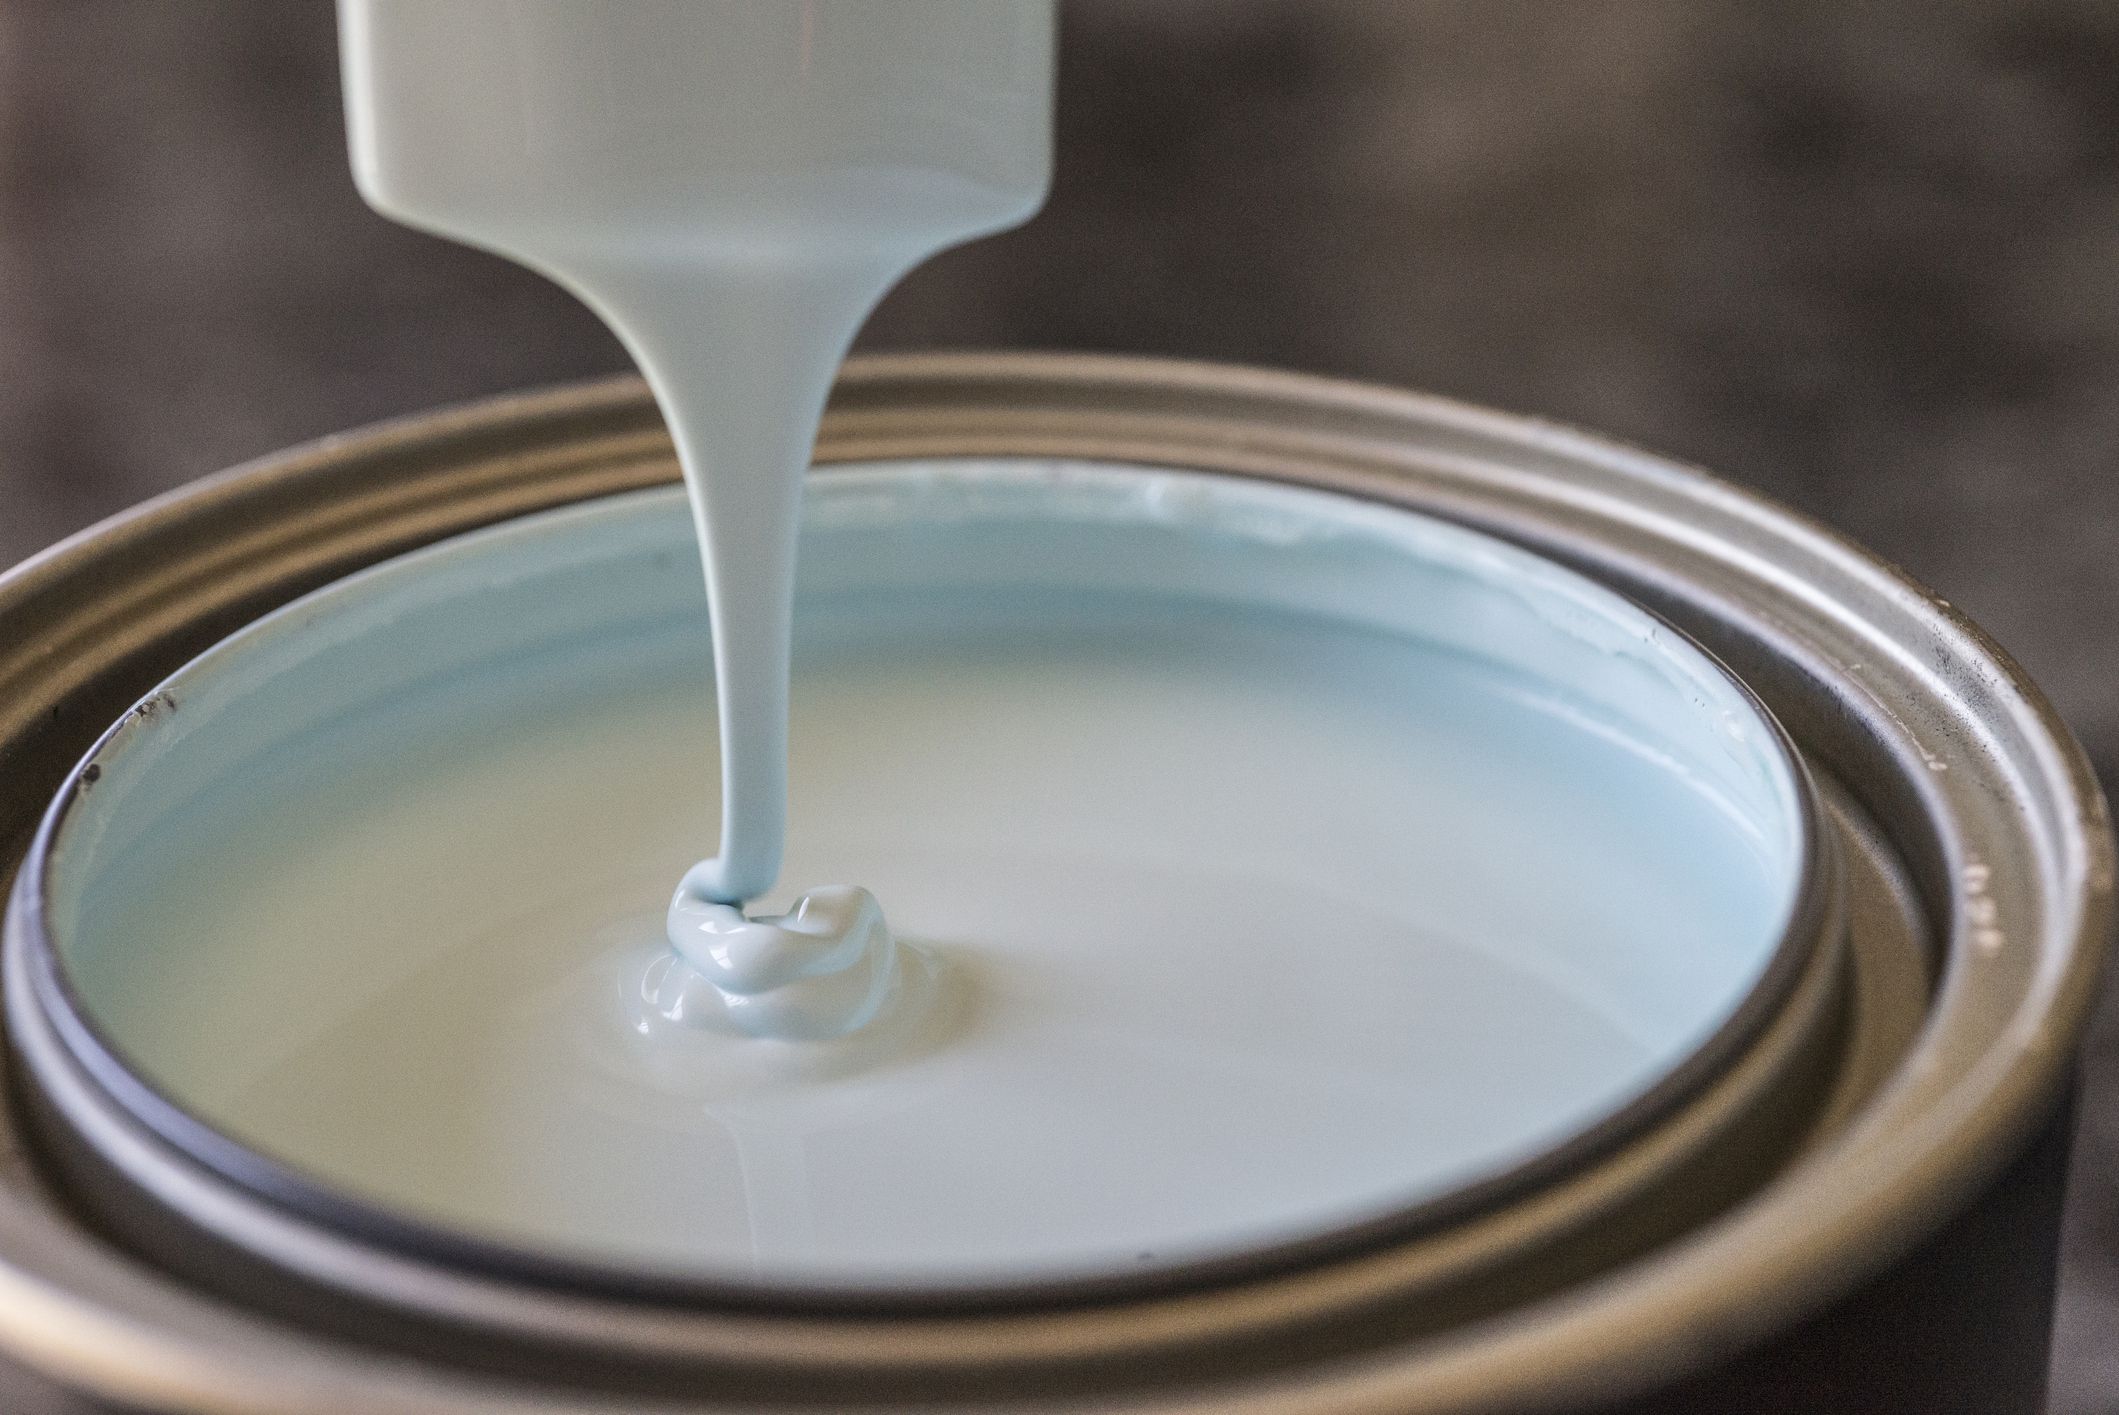 Milk Paint vs. Chalk Paint: Which Is Greener?